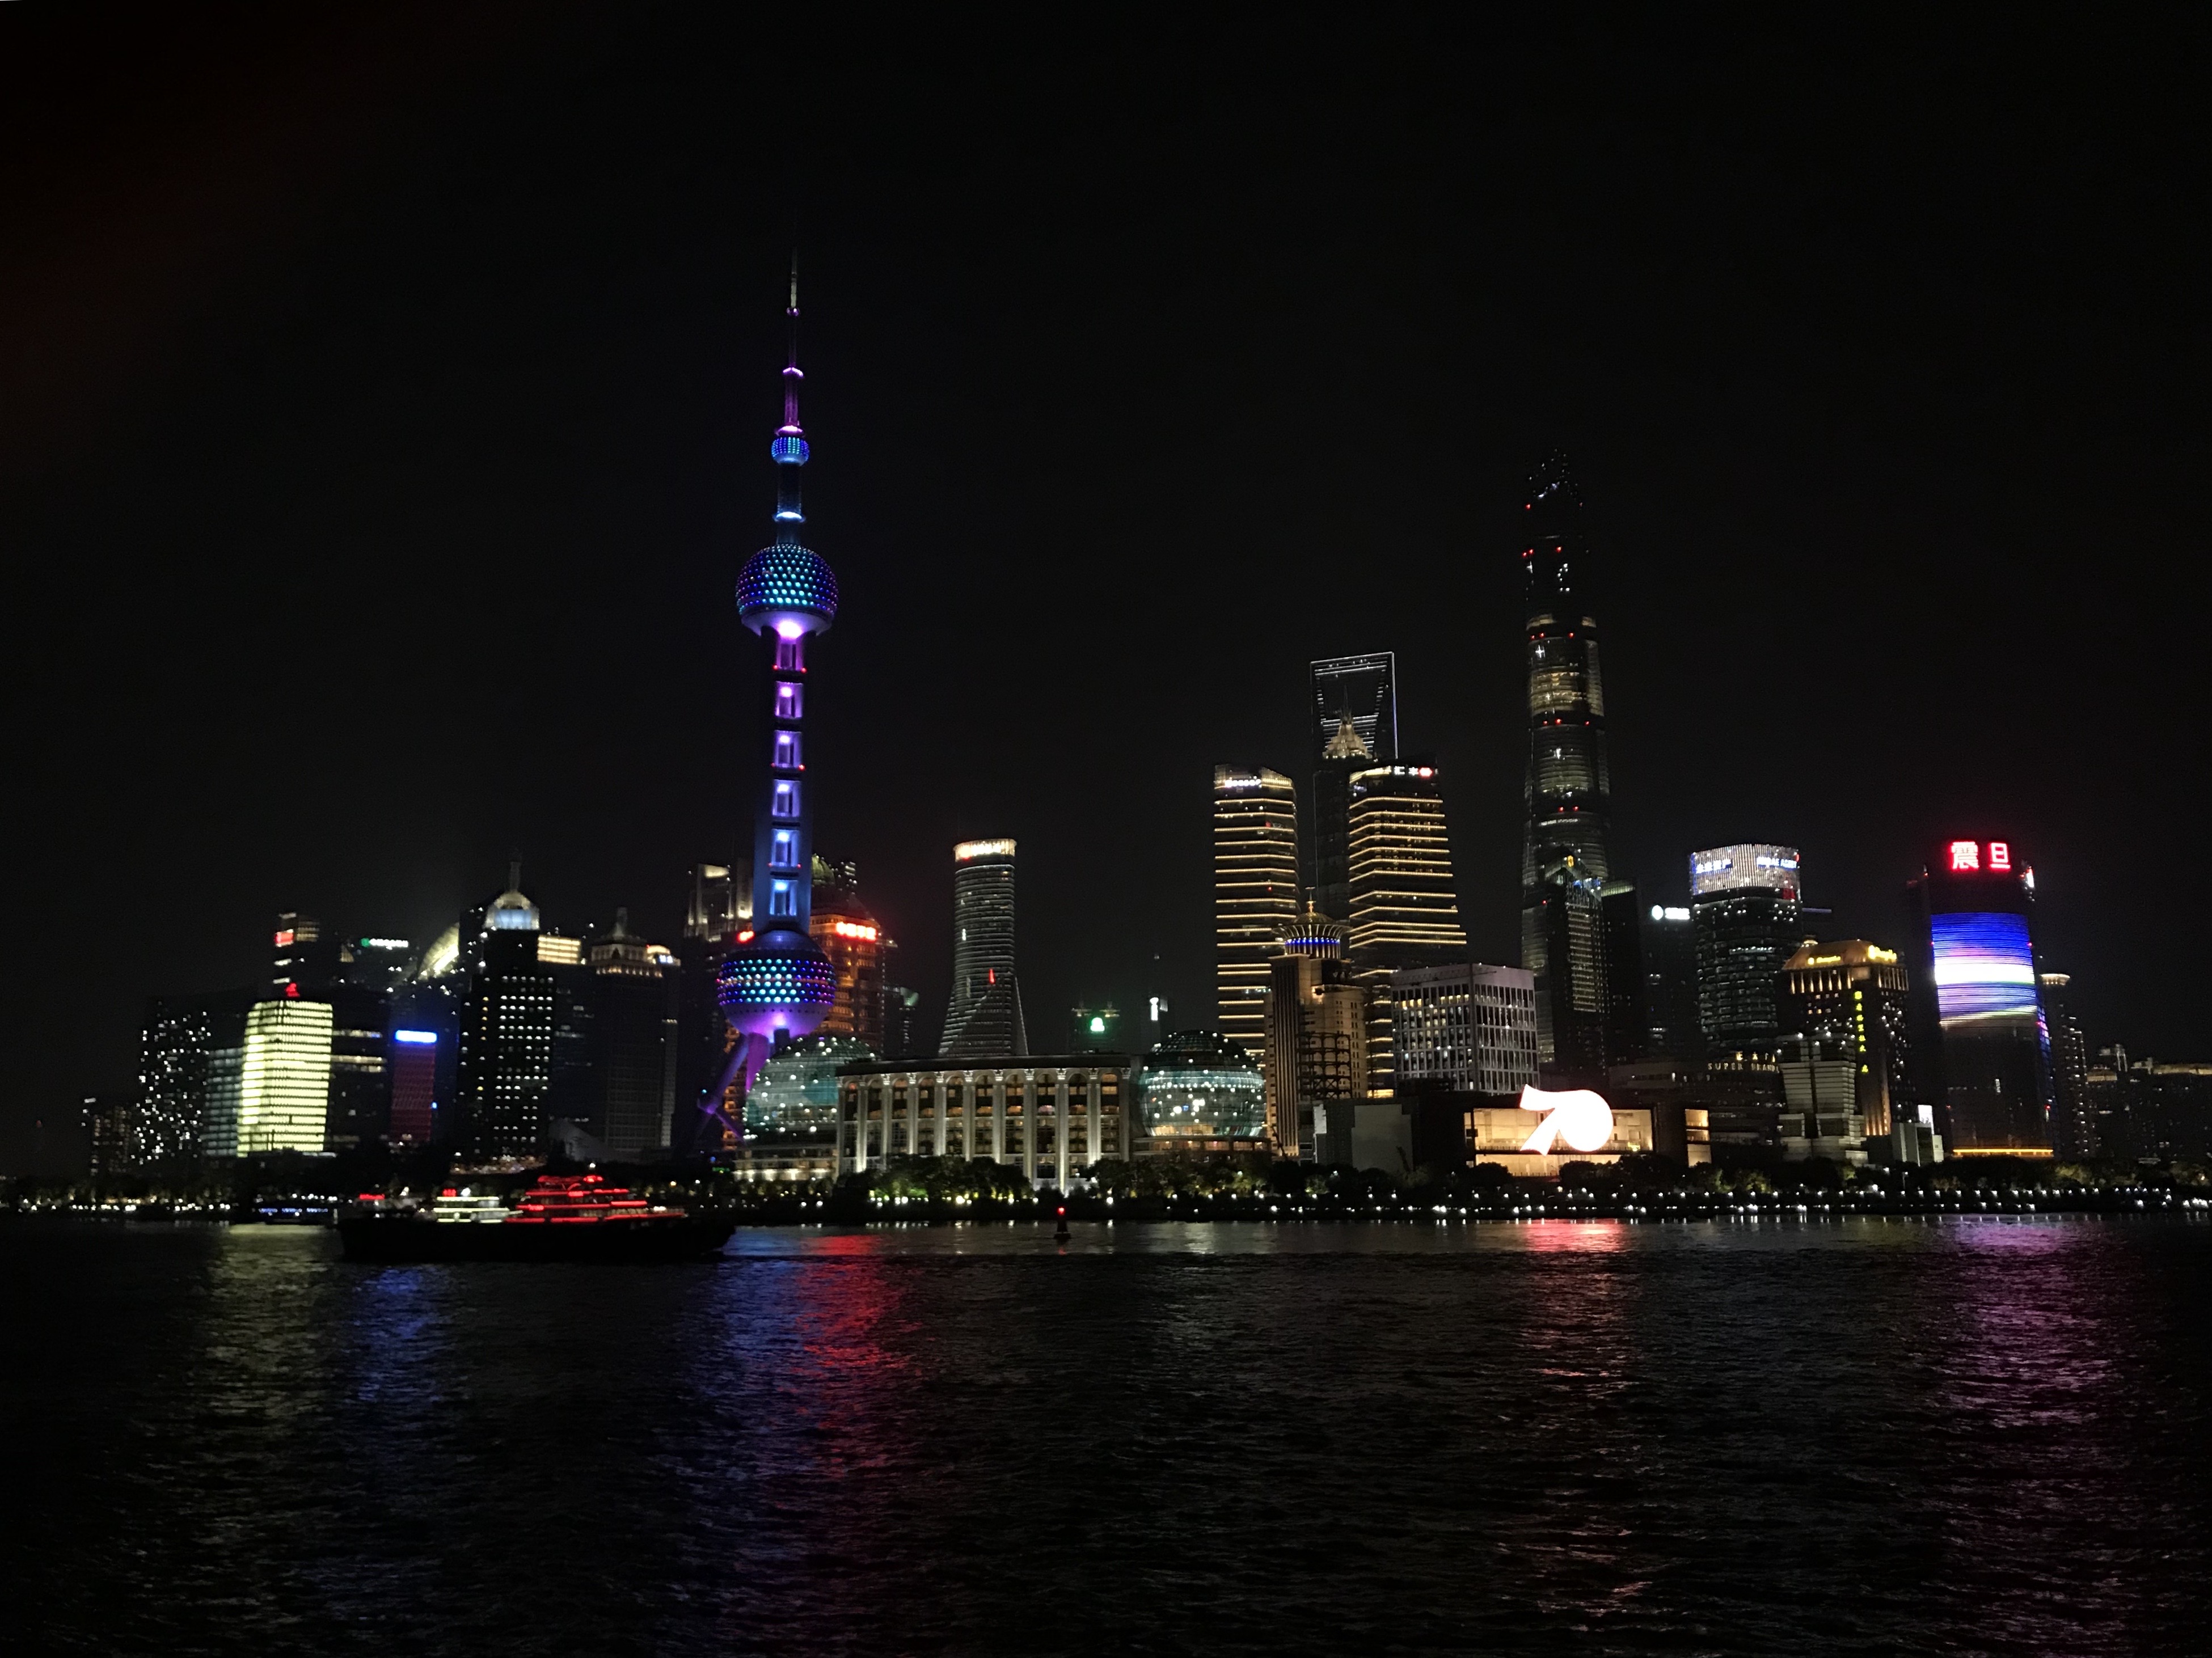 The skyline of Shanghai from "the Bund" at night.